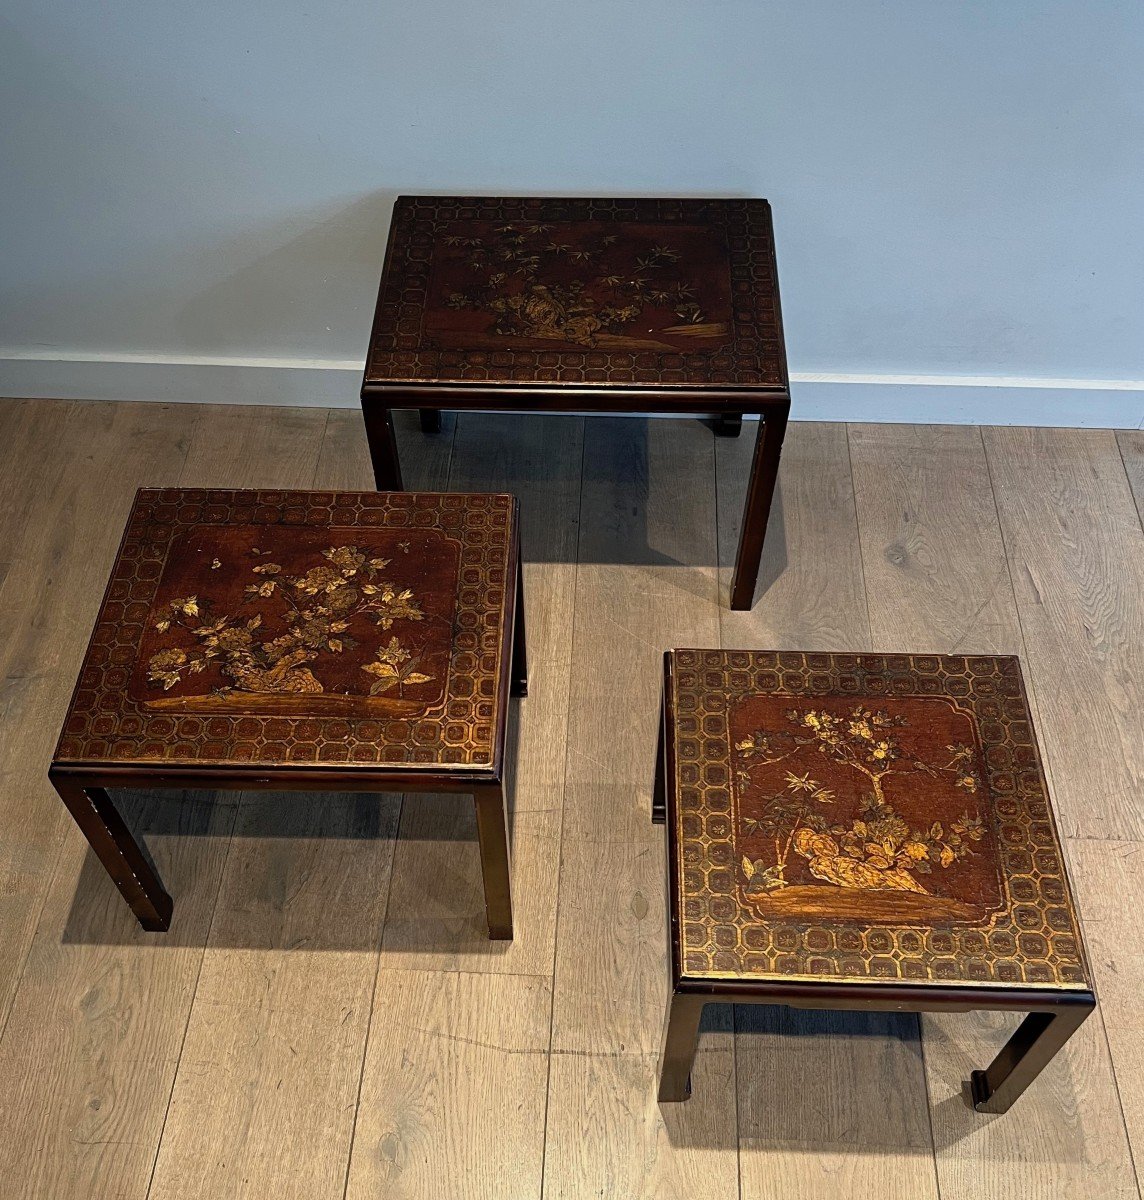 Suite Of Three Burgundy Lacquered Nesting Tables Decorated With Gilding From Chinese Scenes-photo-6